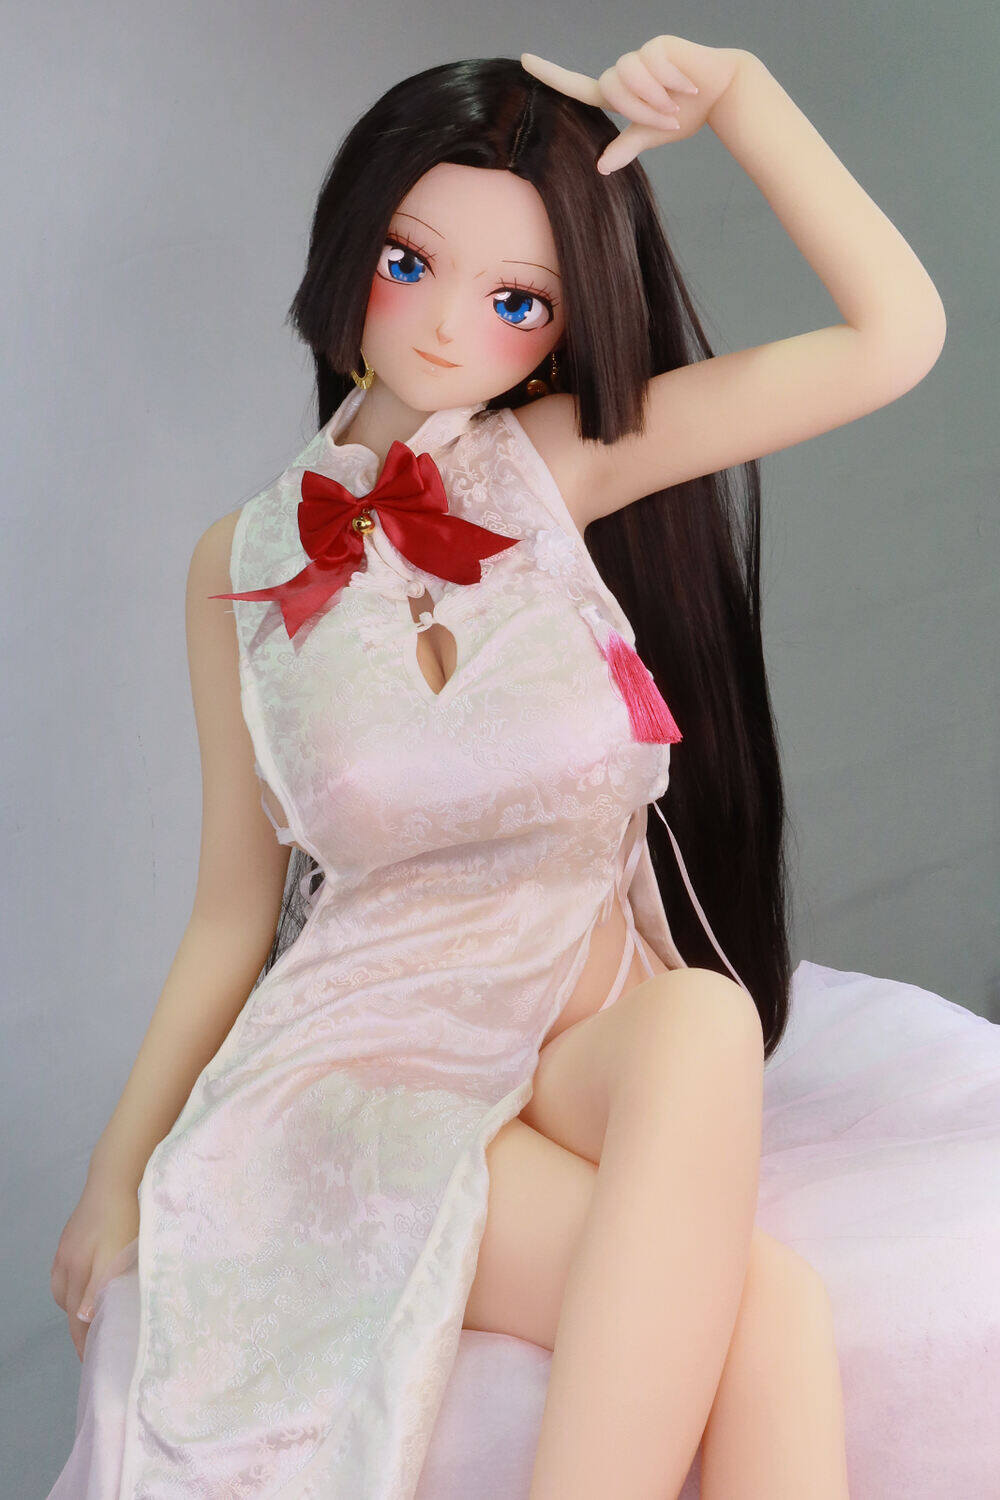 Justice-155cm(5ft1) Aotume Adult Doll H-Cup Normal Skin Tone Big Boobs TPE Dolls image1